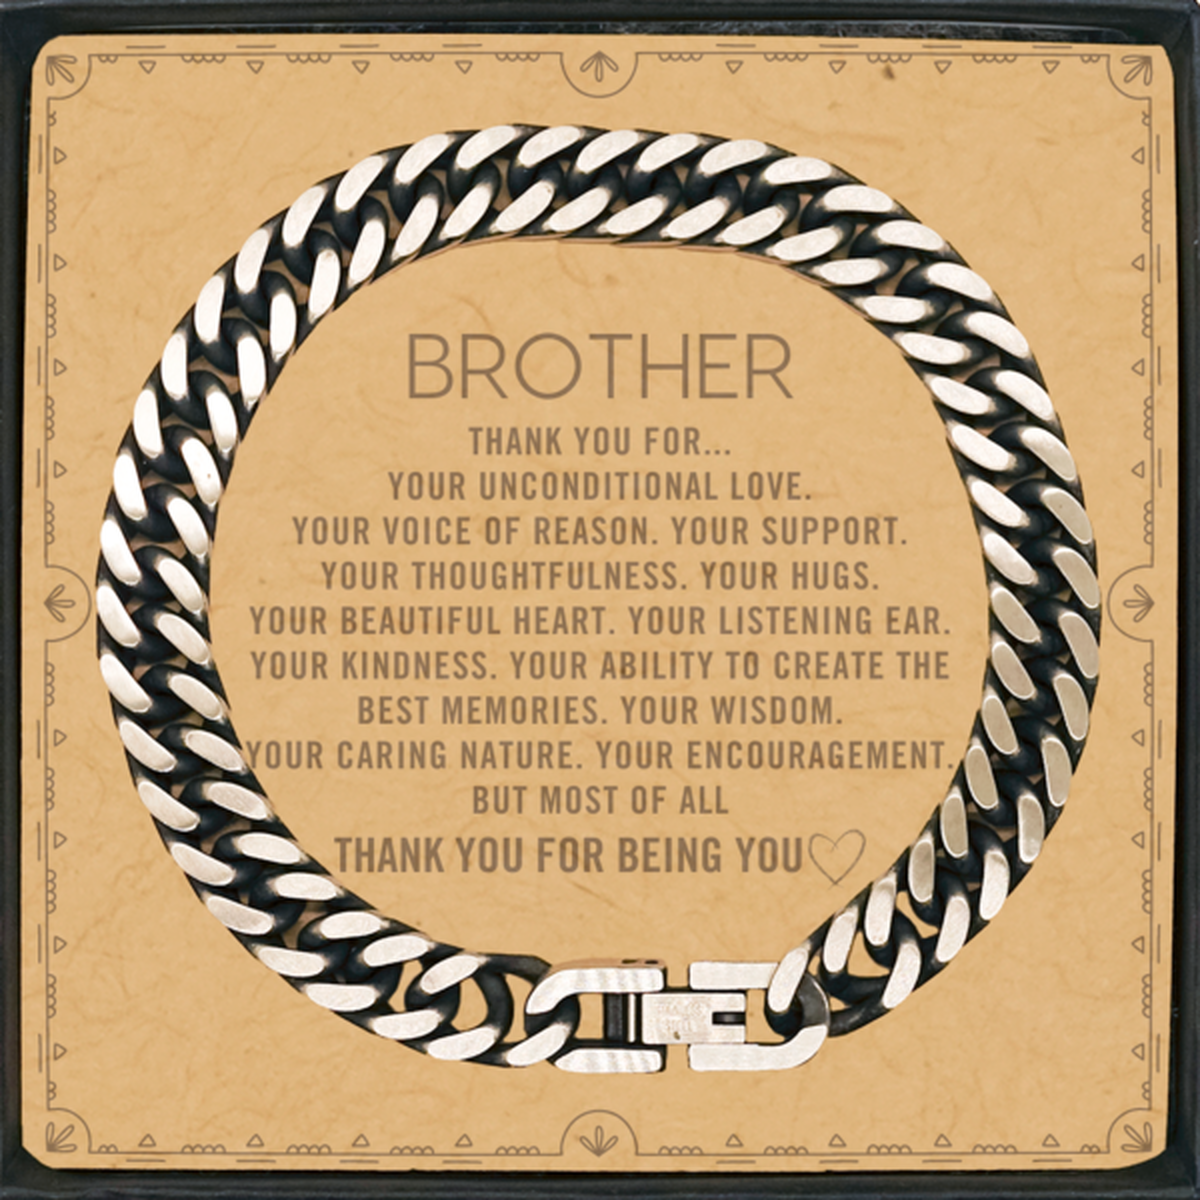 Brother Cuban Link Chain Bracelet Custom, Message Card Gifts For Brother Christmas Graduation Birthday Gifts for Men Women Brother Thank you for Your unconditional love